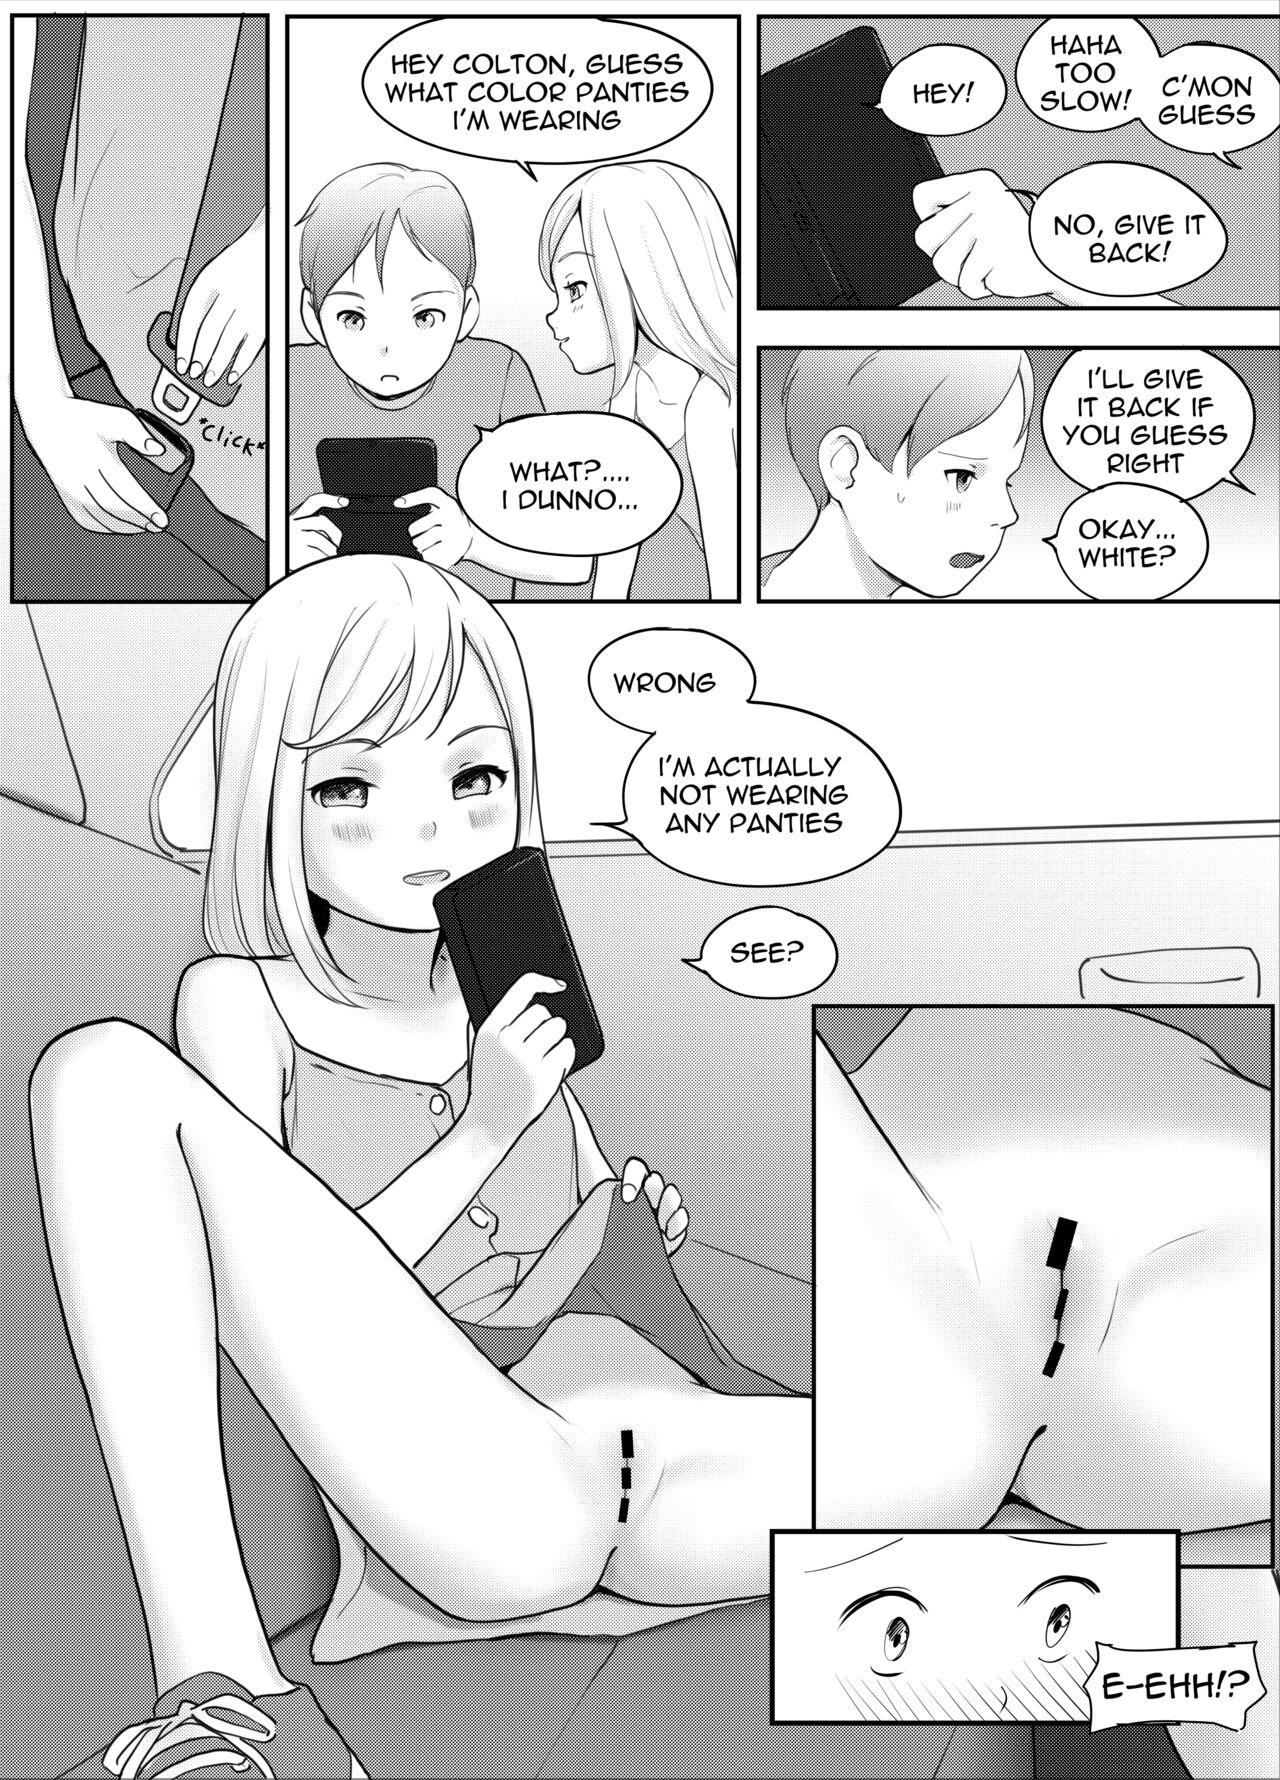 Shorts Passing the Time - Original Best Blow Jobs Ever - Page 4